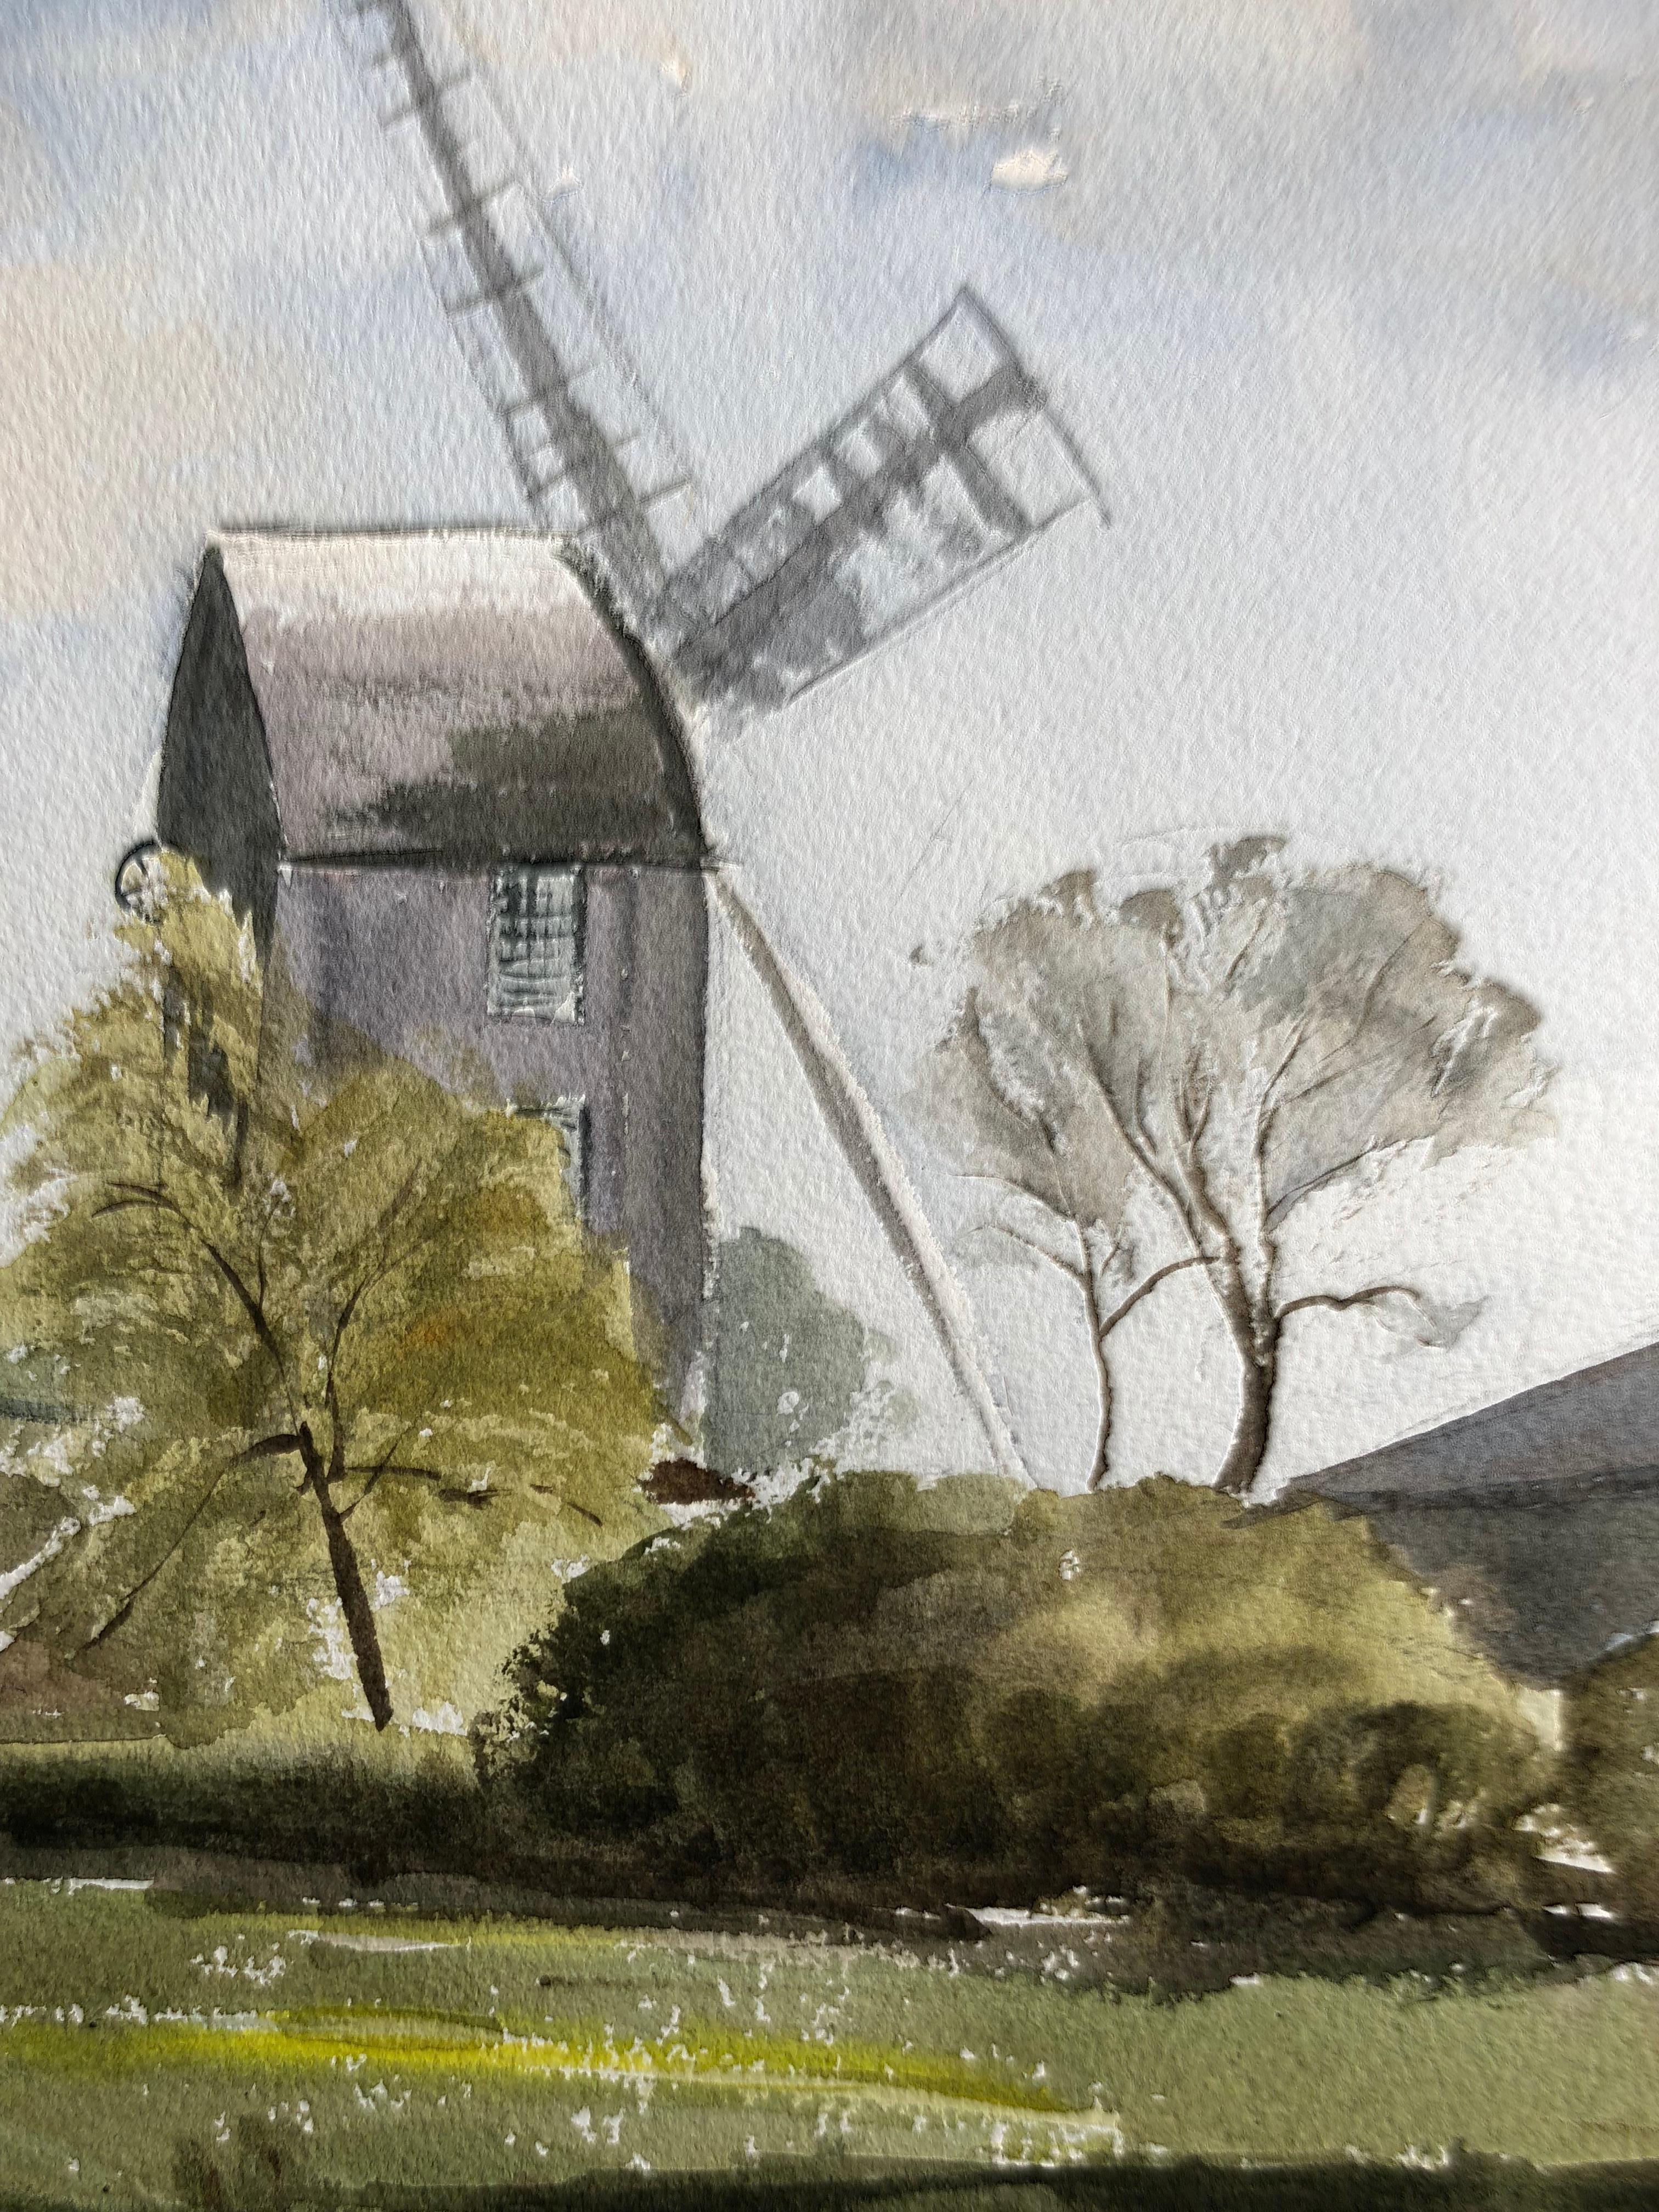 Saxstead Mill, Waterford
by Ronald Birch, British circa 1970's
watercolour on art paper, unframed
overall paper measures: 15 x 22.25 inches
titled and dated 'May 1991'

*FREE SHIPPING ON THIS PAINTING*: AMERICAN, EUROPE & UNITED